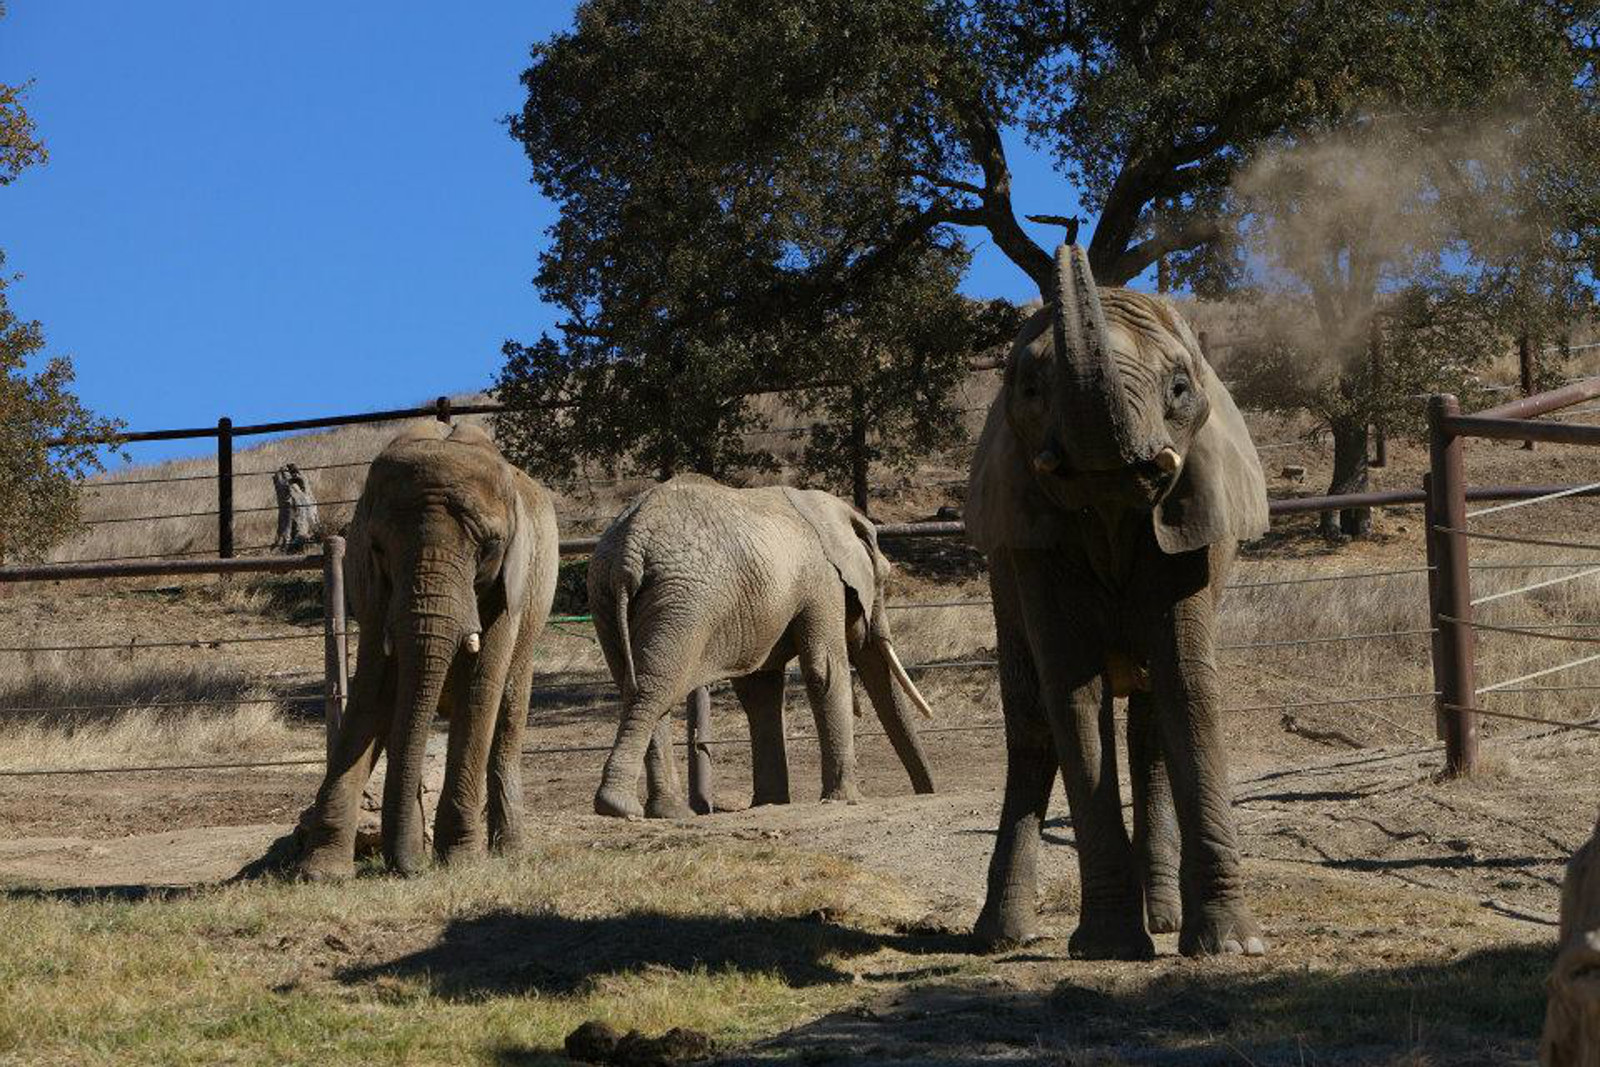 One Year Later, Former Toronto Zoo Elephants are Thriving at Their Sanctuary Home